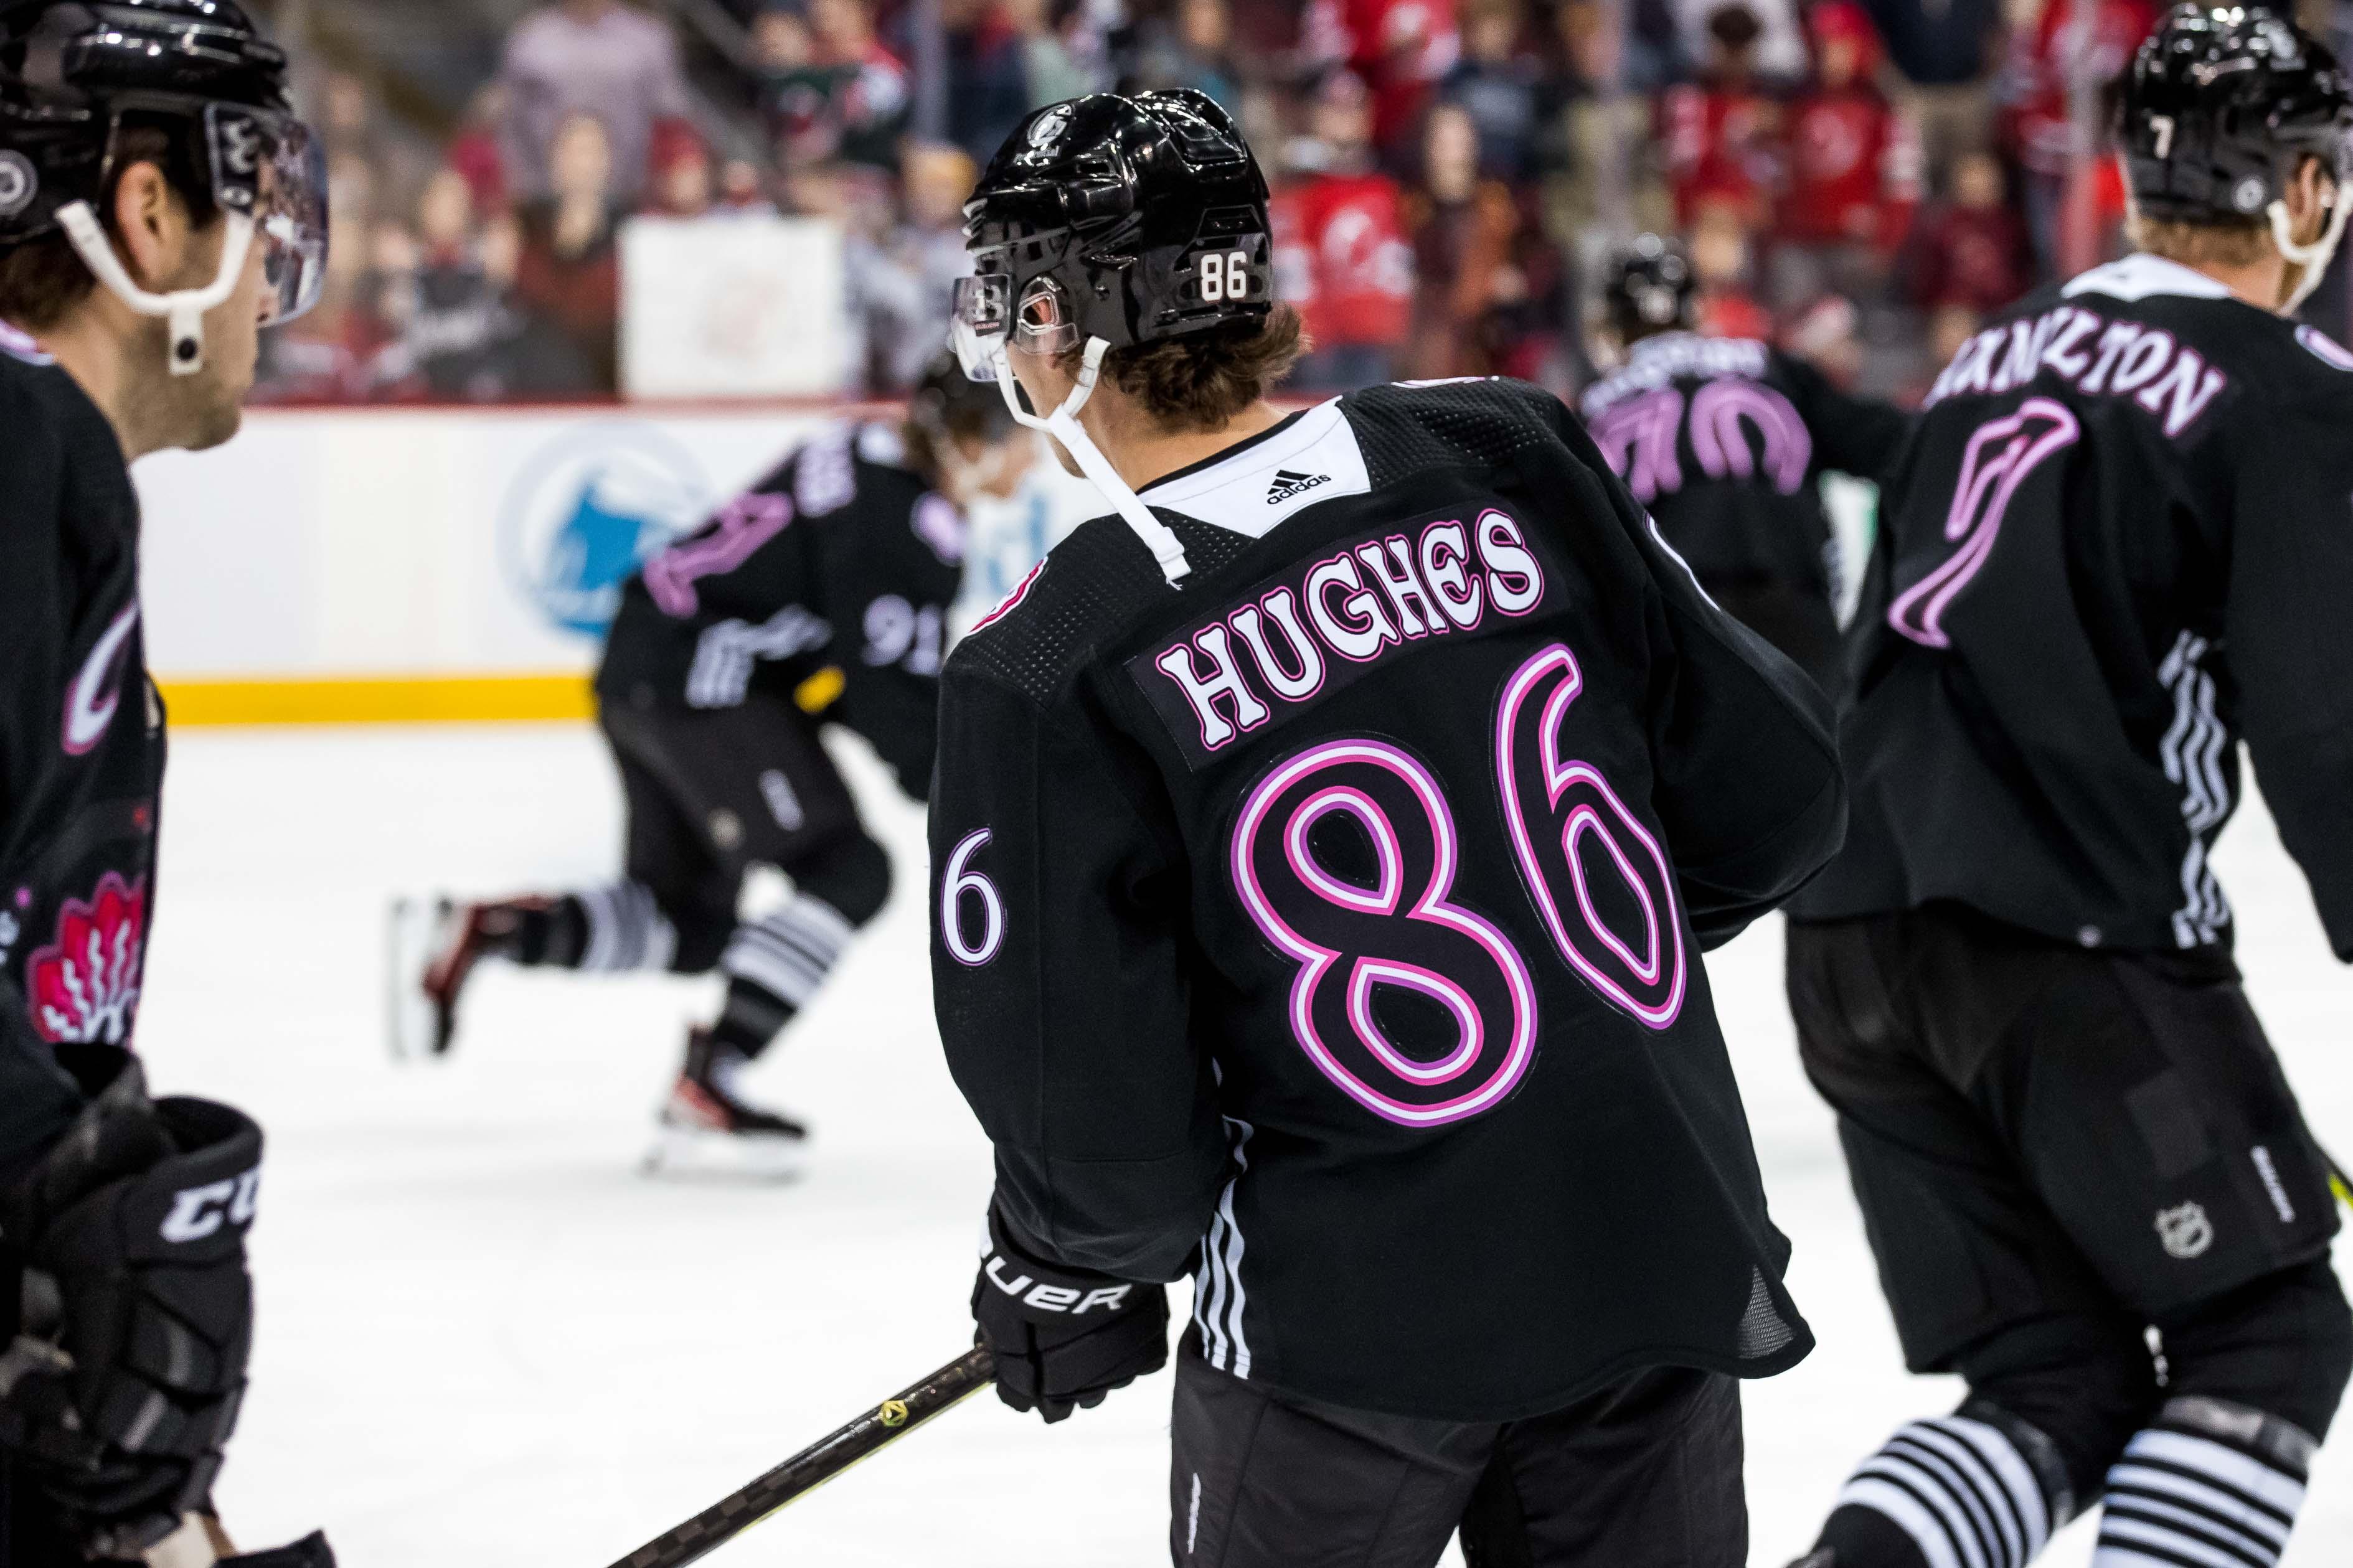 The Condors are wearing these jerseys for Hispanic heritage night